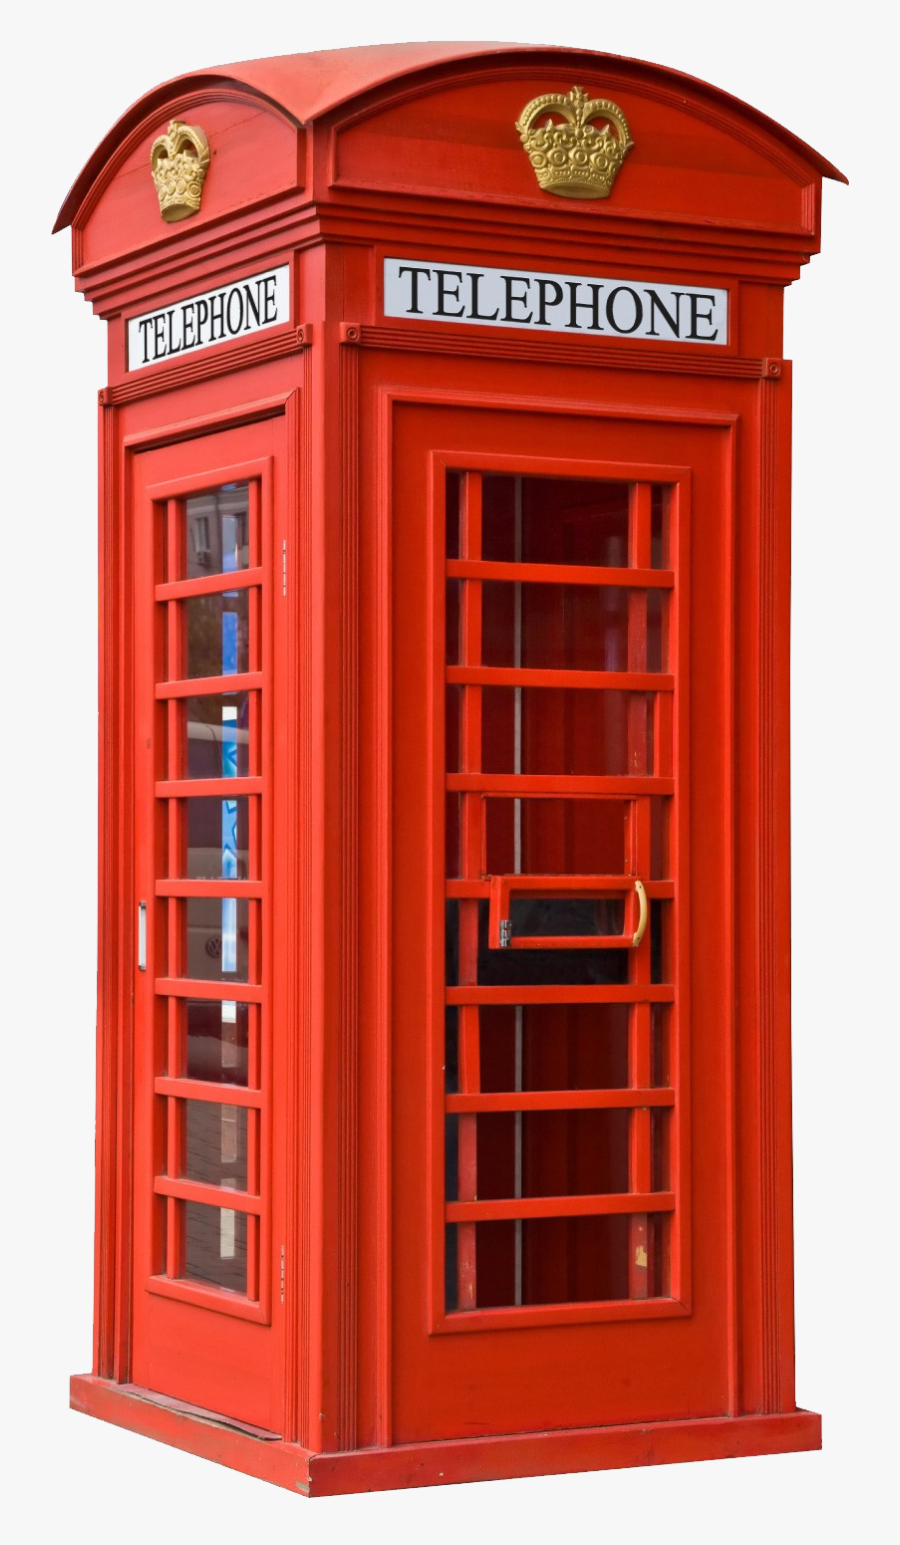 Telephone Booth Png - Red Telephone Box Png, Transparent Clipart